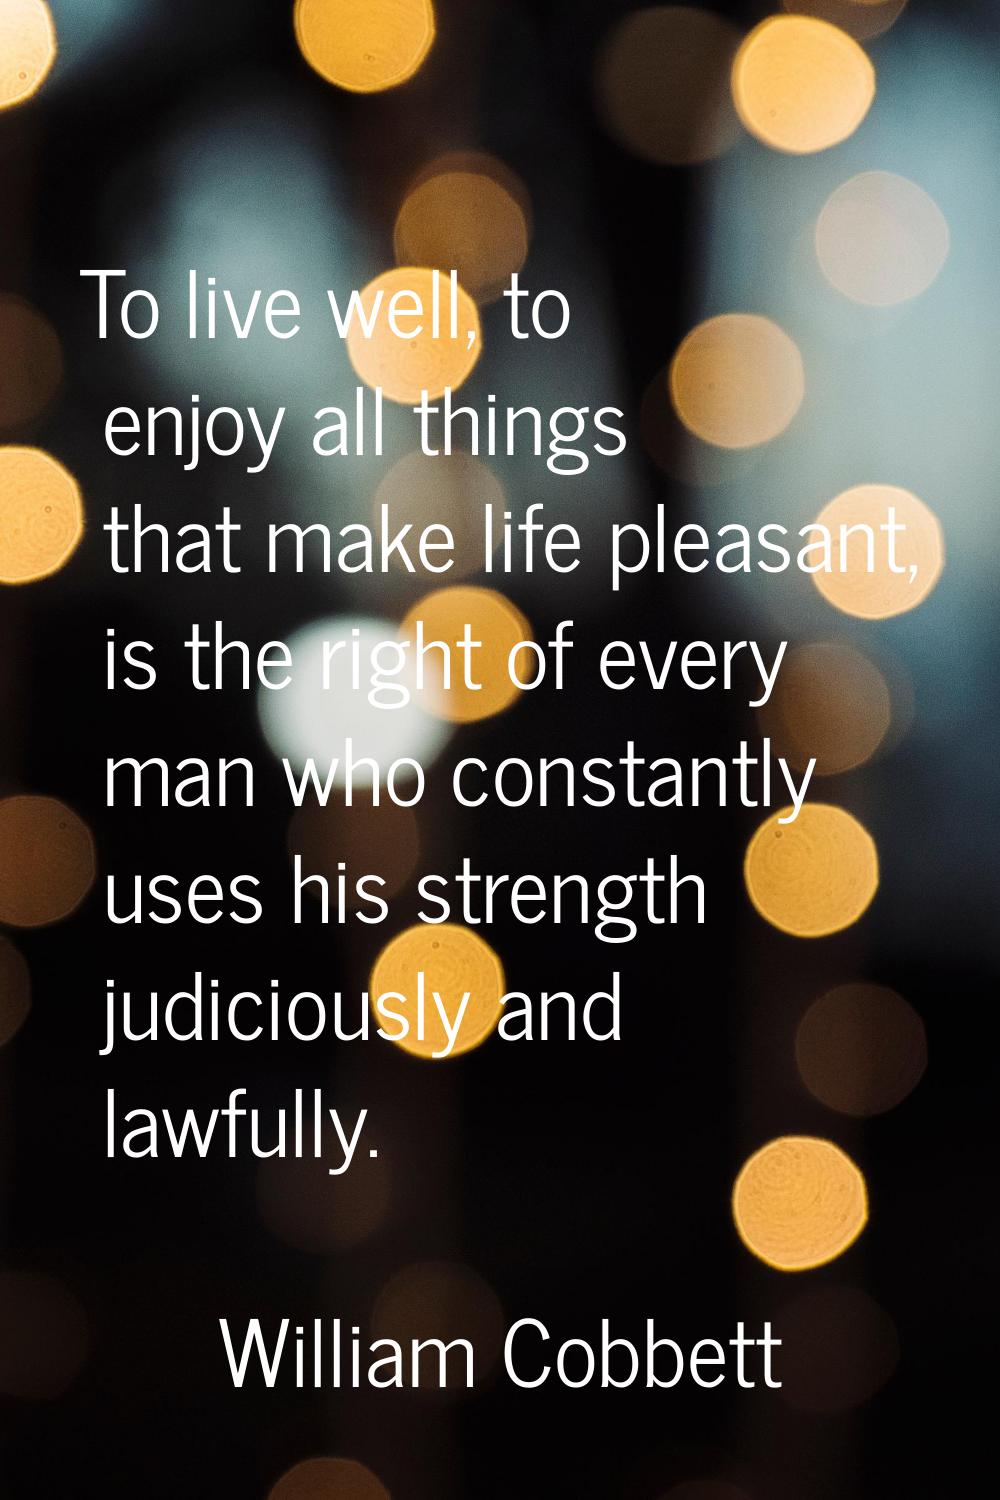 To live well, to enjoy all things that make life pleasant, is the right of every man who constantly